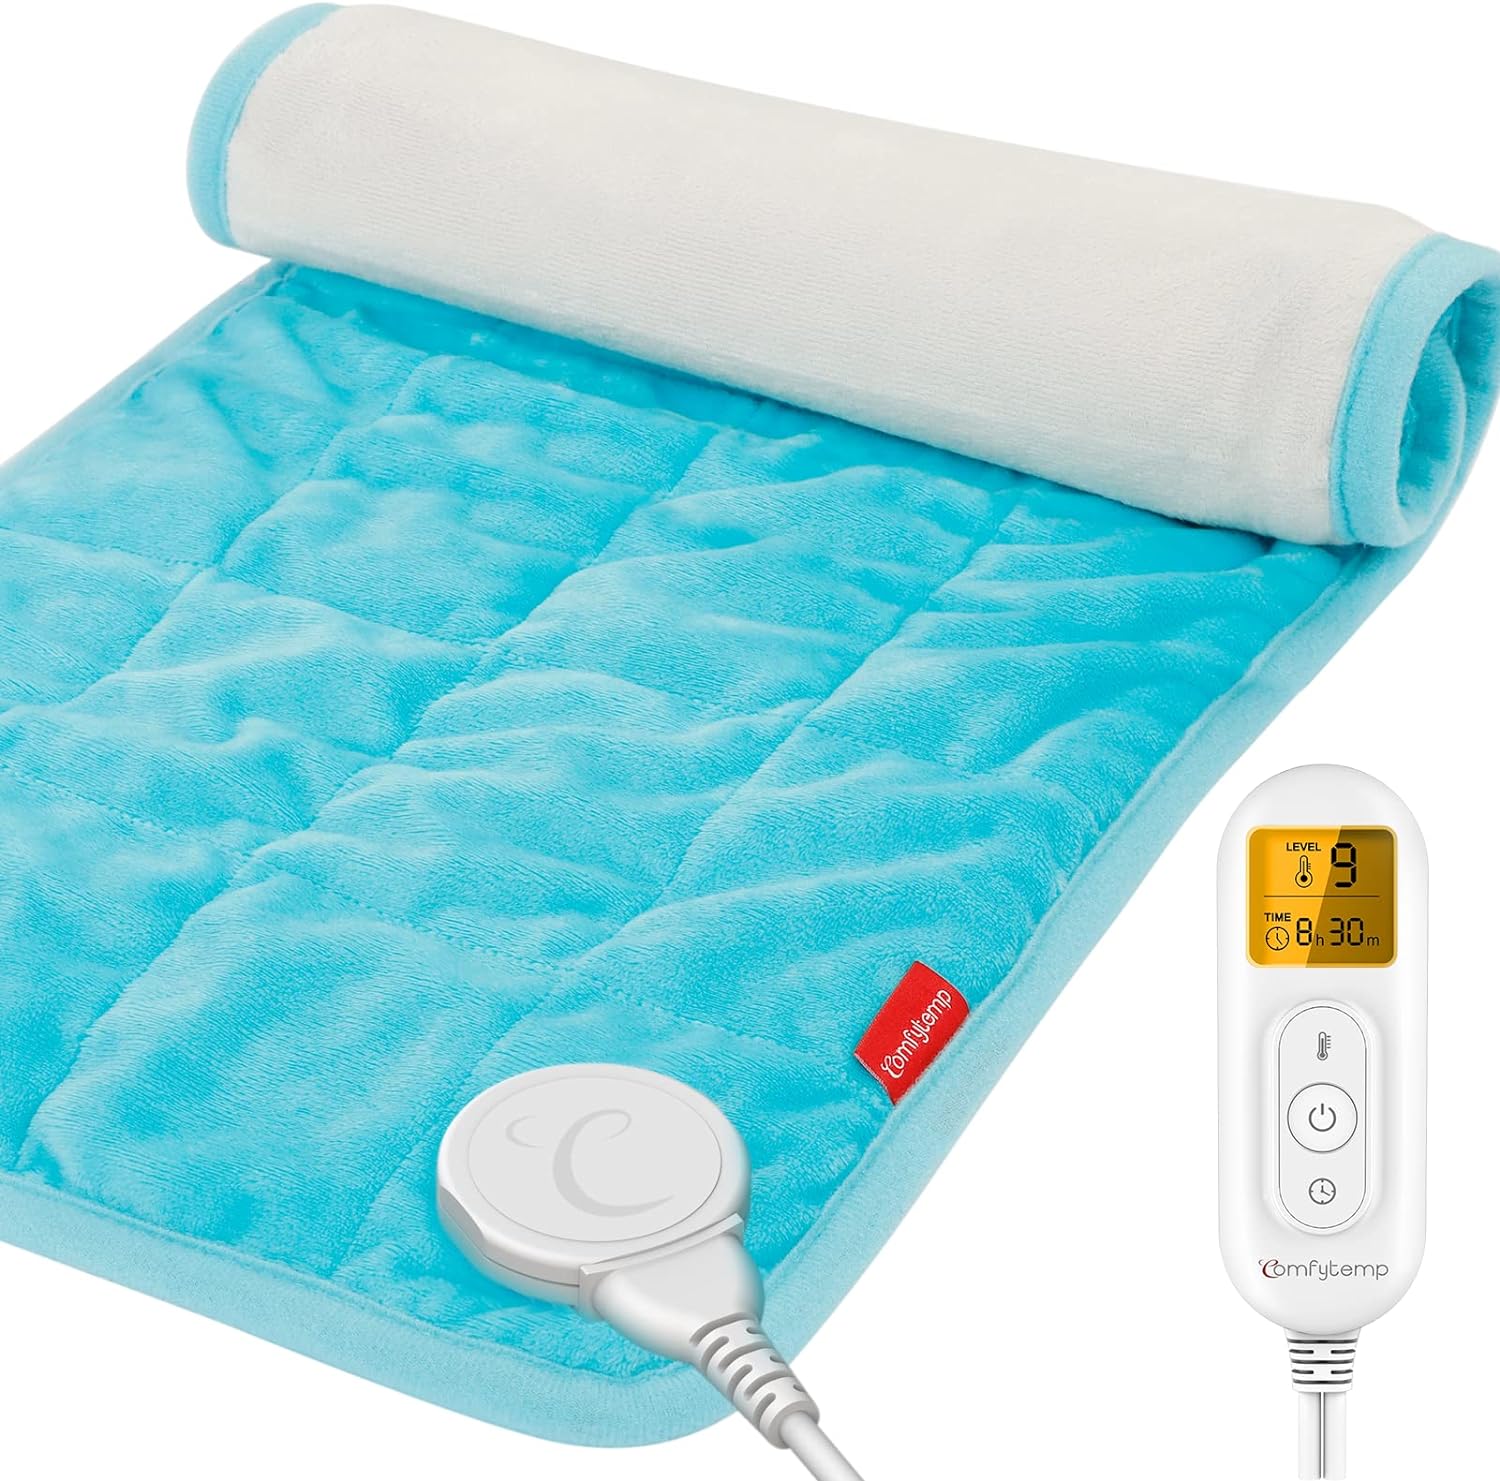 I purchased this heating pad on September 26, 2023 and its the first product of this brand I have purchased. It worked great for 4 months but then it stopped working and wouldnt turn on anymore. The company only offers a 30 day return policy, but they replaced my product for free even after 4 months. The company has great customer service and was quick to respond to my issue. They offered to send a replacement and I received it in 2 days! I love this heating pad! It is the perfect weight for a